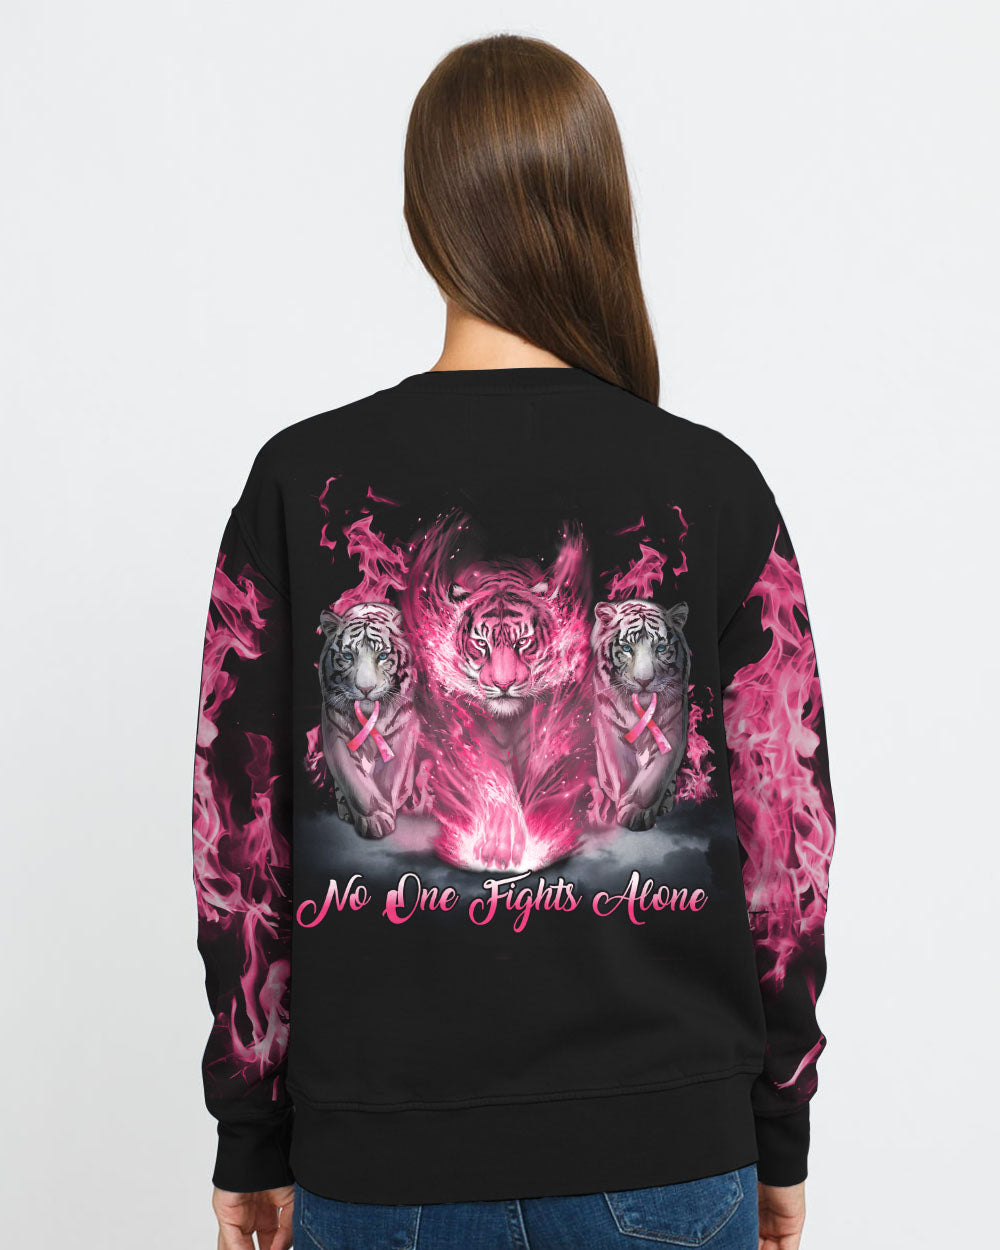 No One Fights Alone Tiger Women's Breast Cancer Awareness Sweatshirt